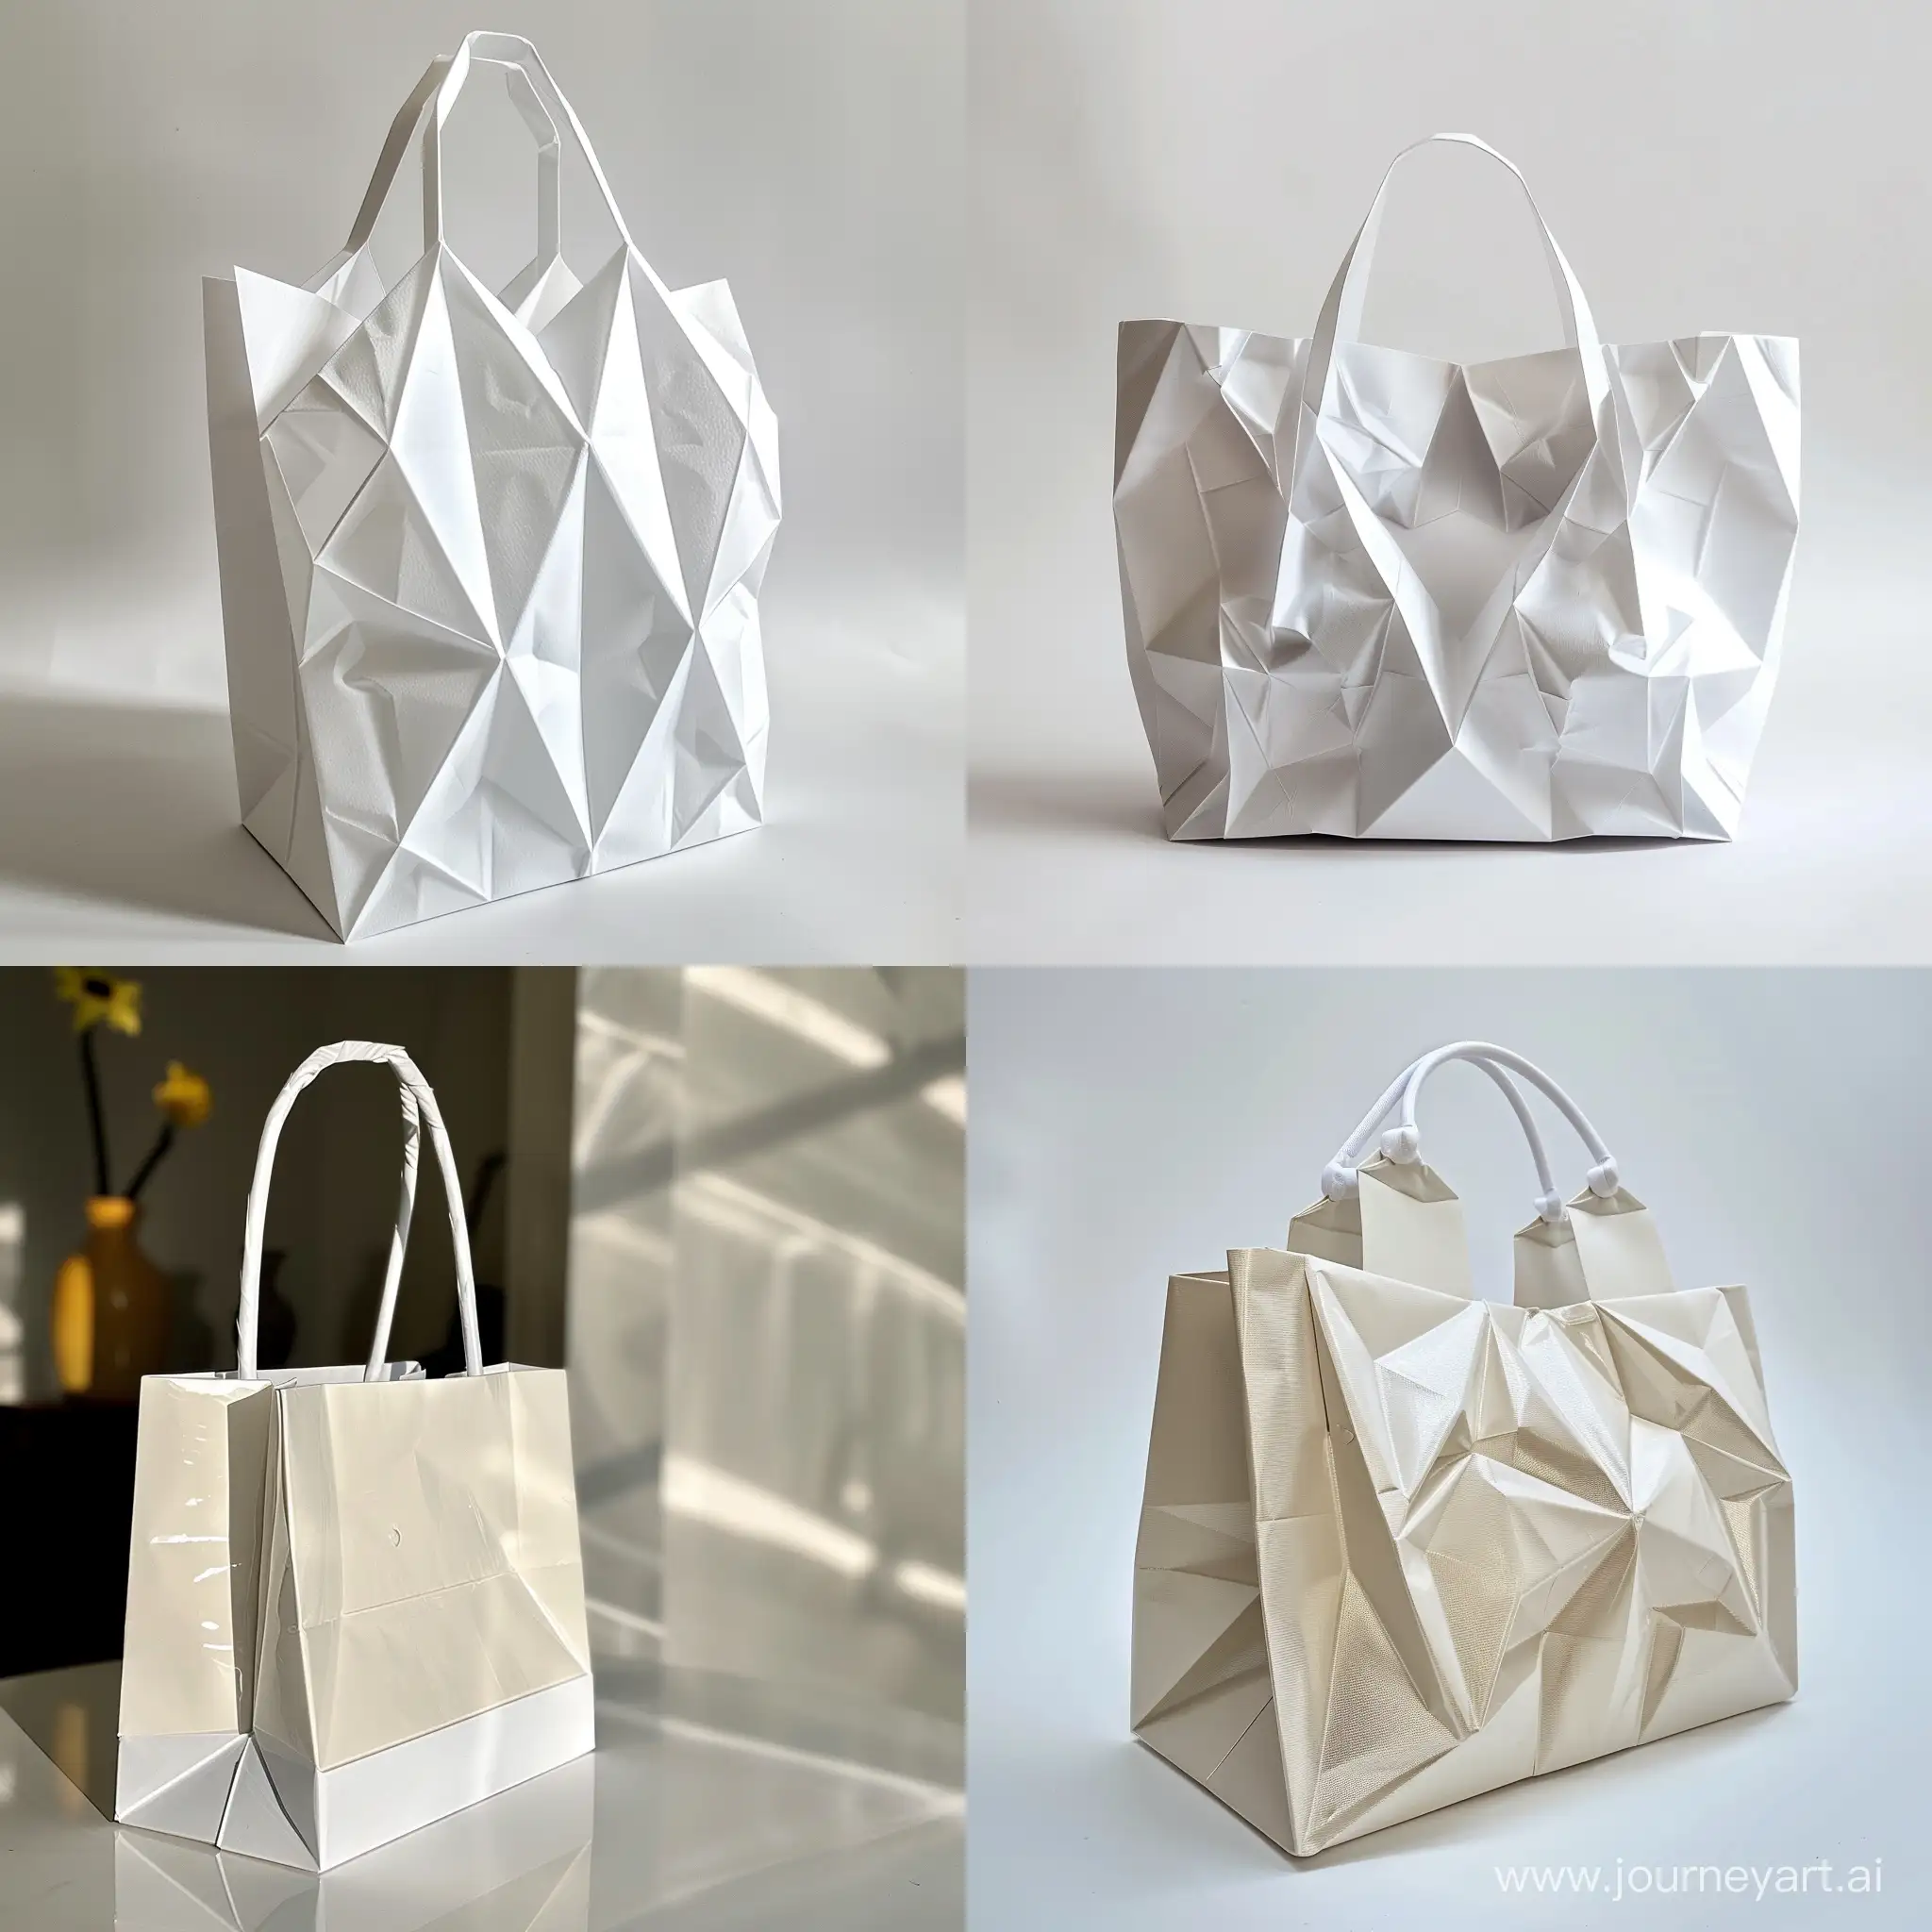 A paper handbag made of 170 gsm glossy white paper, measuring 44 centimeters in width, 32 centimeters in height, and with a gusset of 12 centimeters (expandable to 12 centimeters), featuring a standard white handle